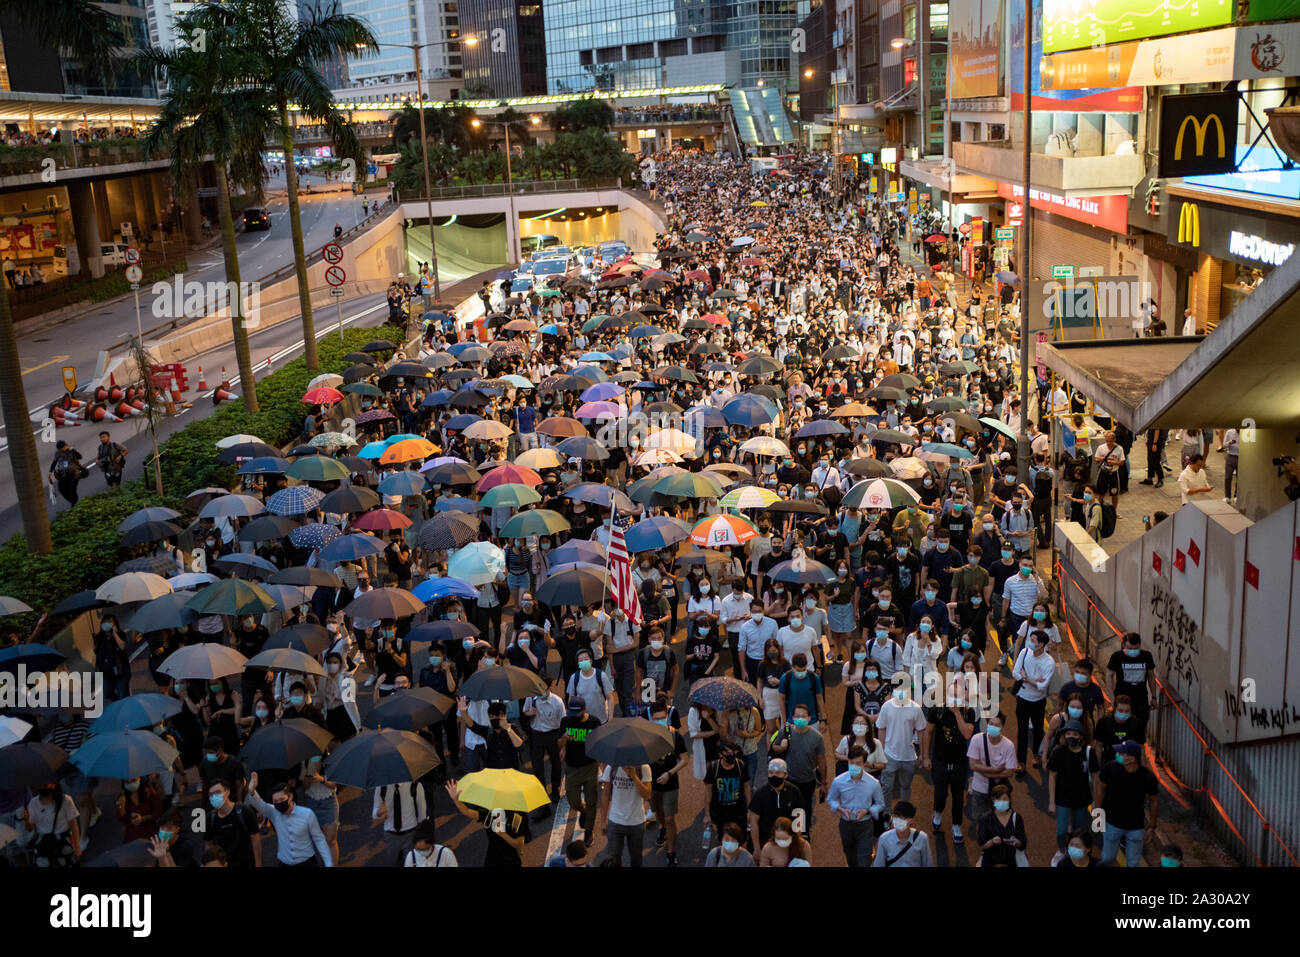 Hong Kong. 4 October 2019. Large gathering of pro- democracy supporters evening in Hong Kong Central District. Protestors angry with Chief Executive Carrie Lam's use of Emergency Powers to ban the wearing of masks during protests. March proceeded peacefully towards Wanchai district.  Iain Masterton/Alamy Live News. Stock Photo